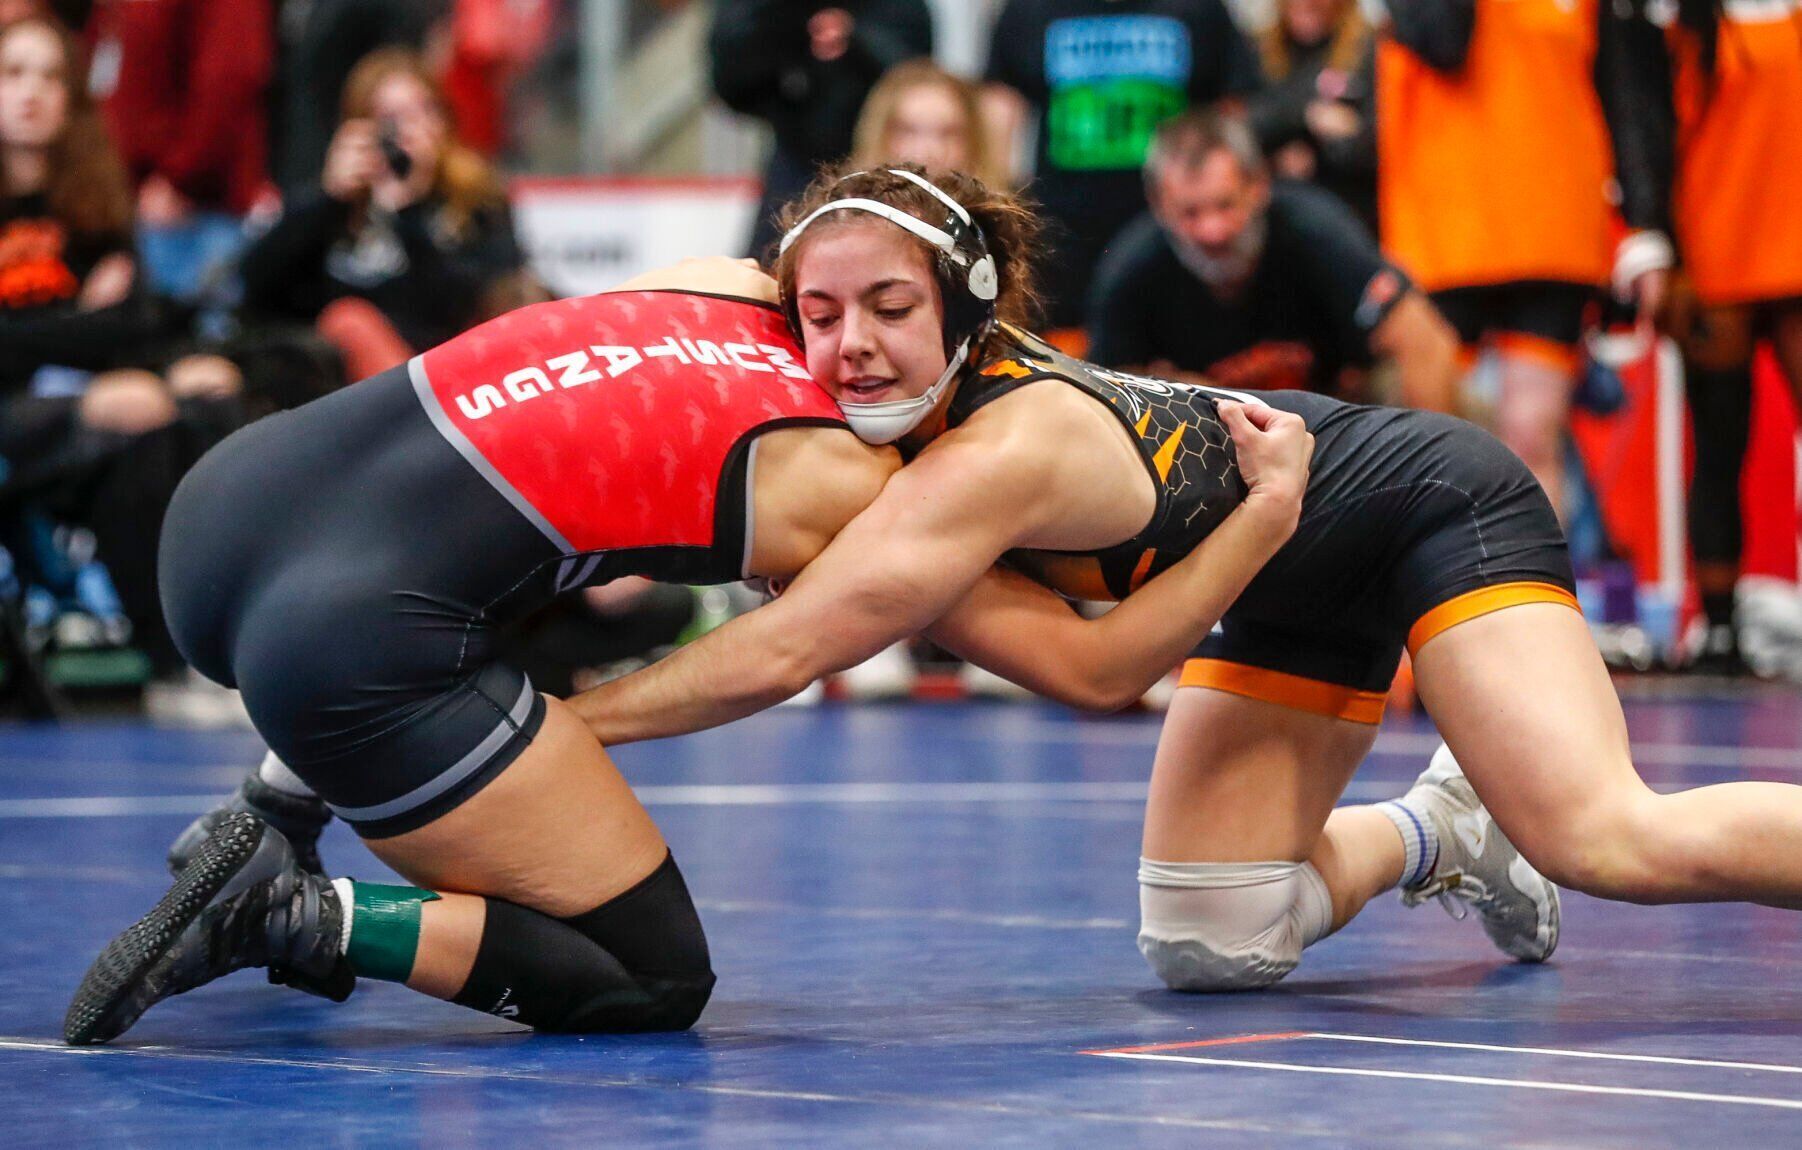 High School Wrestling Luft has honored her brother by creating her own legacy photo